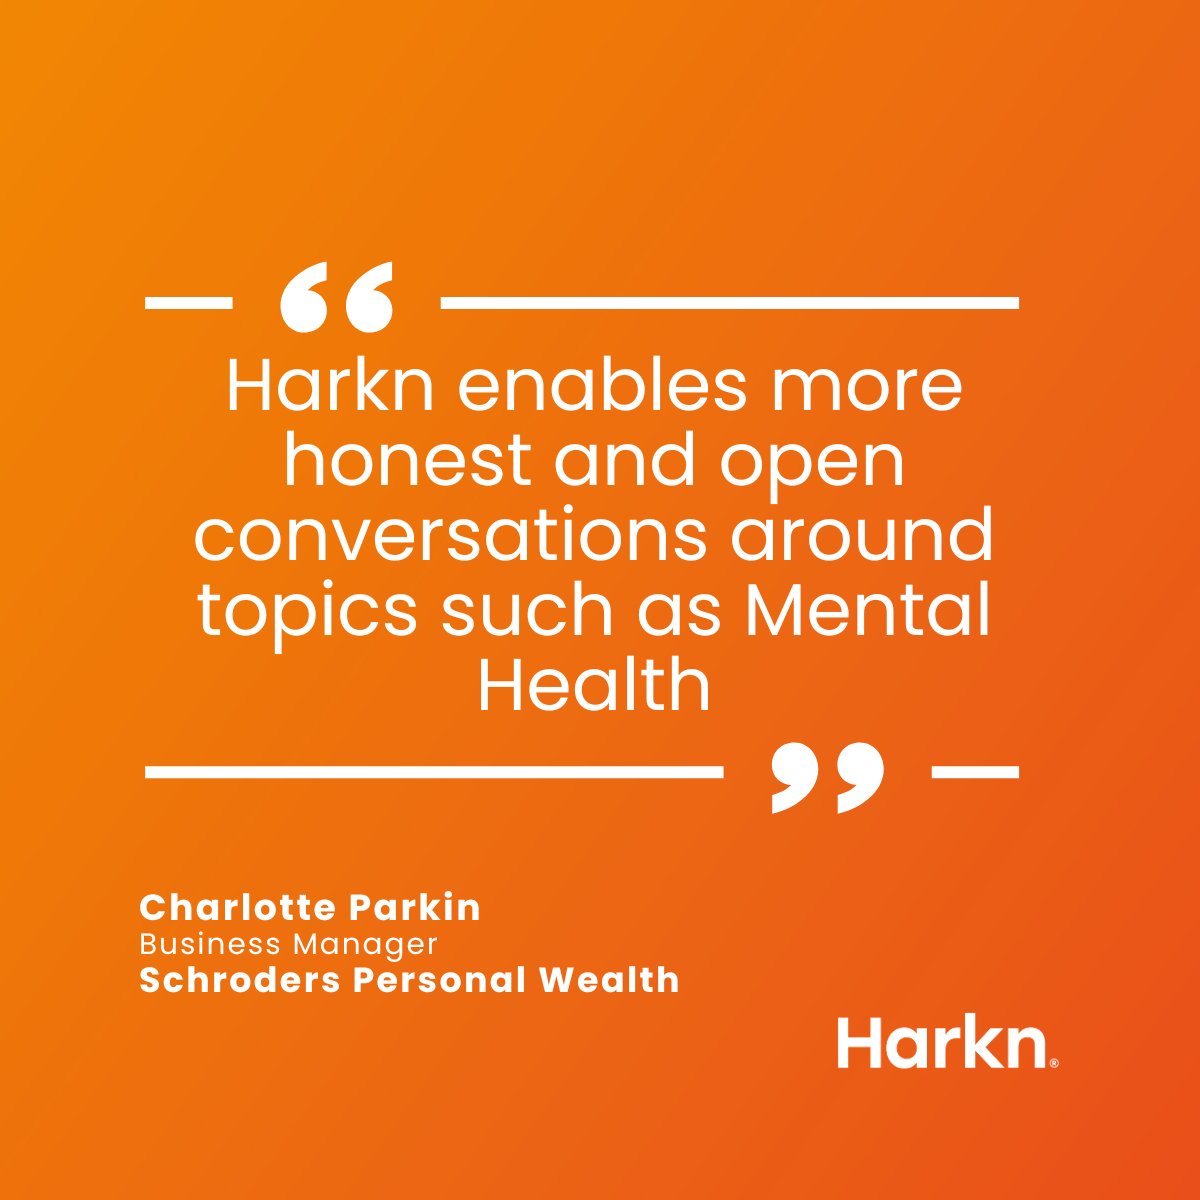 That Harkn enables more open and honest dialogue is a pretty big deal, wouldn't you say? 

#psychologicalsafety #wellbeing #mentalhealth #sensemaking #inclusion #employeevoice #connection #belonging